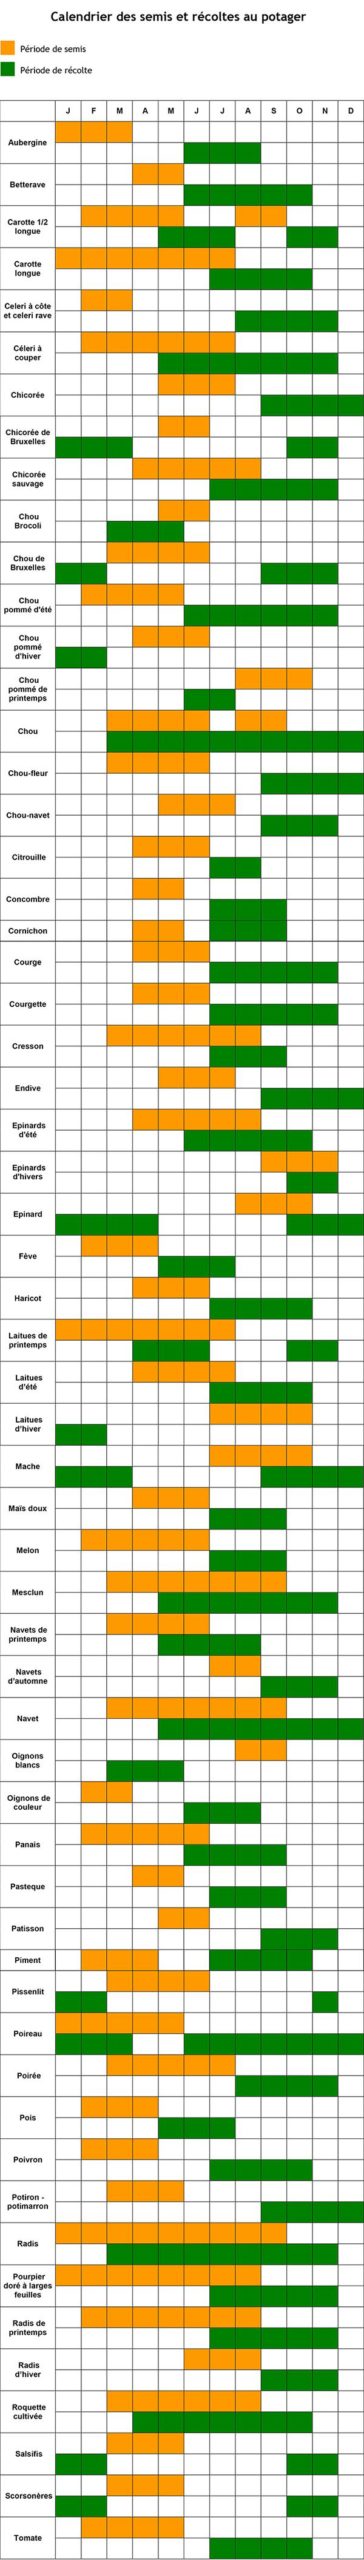 calendrier-semis-potager-urbain-permaculture